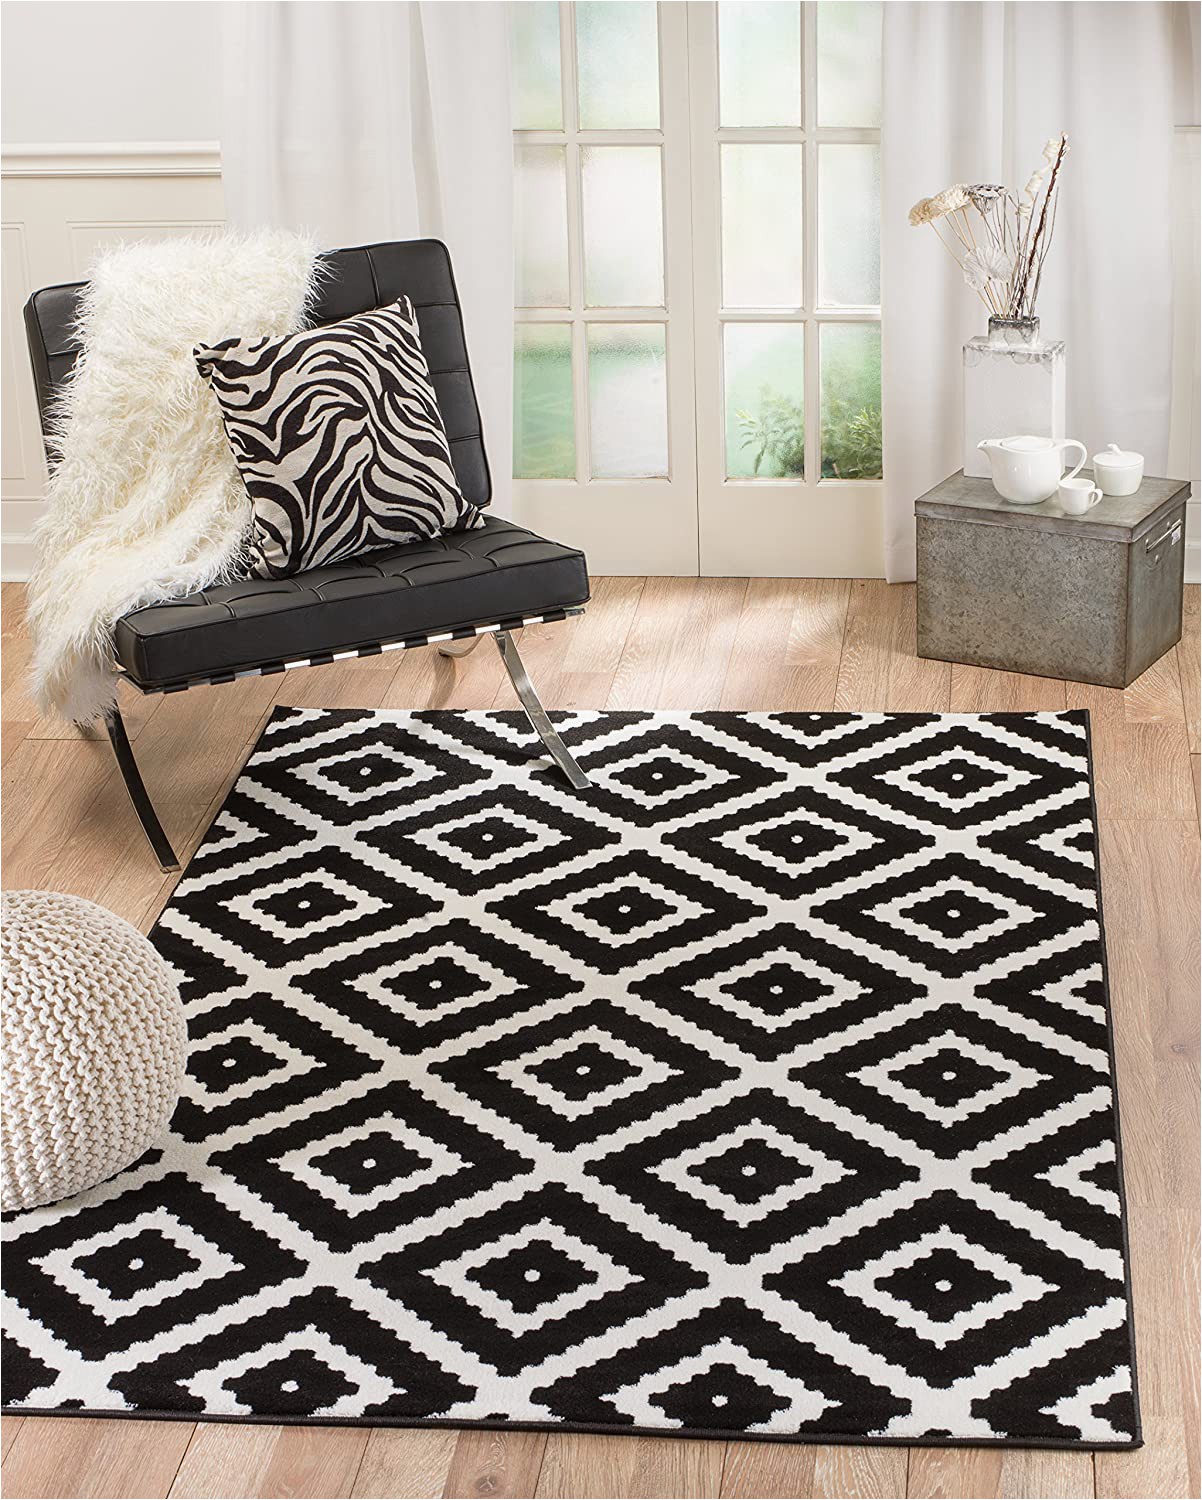 Amazon area Rugs for Sale Summit 46 Black White Diamond area Rug Modern Abstract Many Sizes Available 3 6" X 5 3 6" X 5